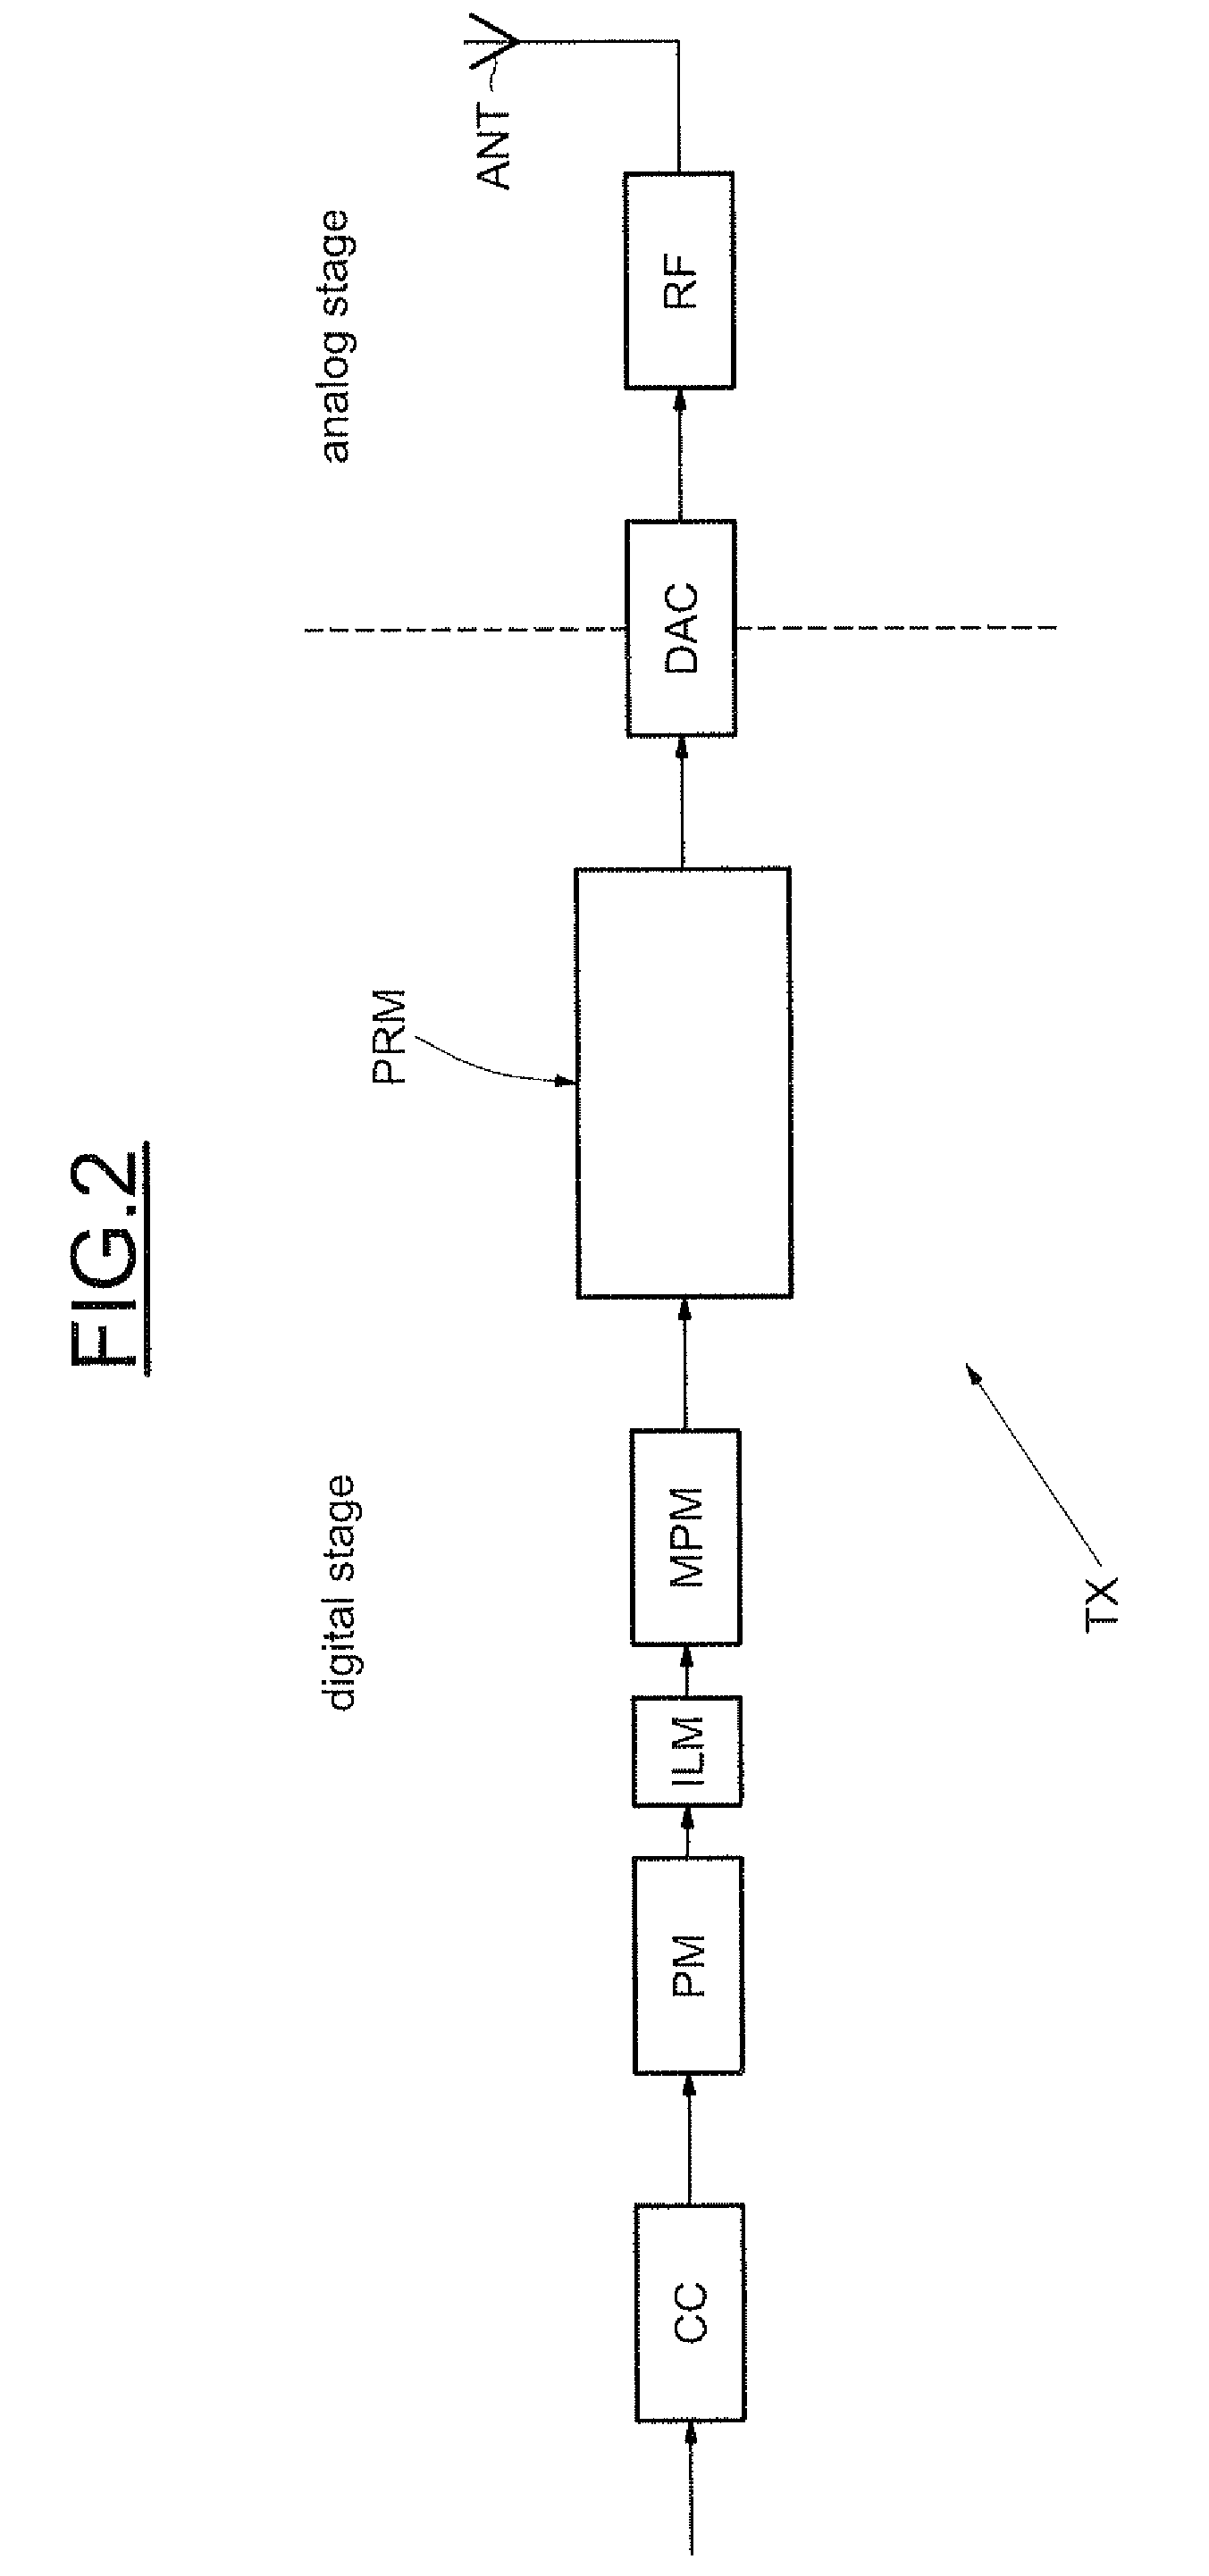 Method and device for notching the transmission band of an analog signal, in particular for a detect and avoid (DAA) operation mode of an MB-OFDM system